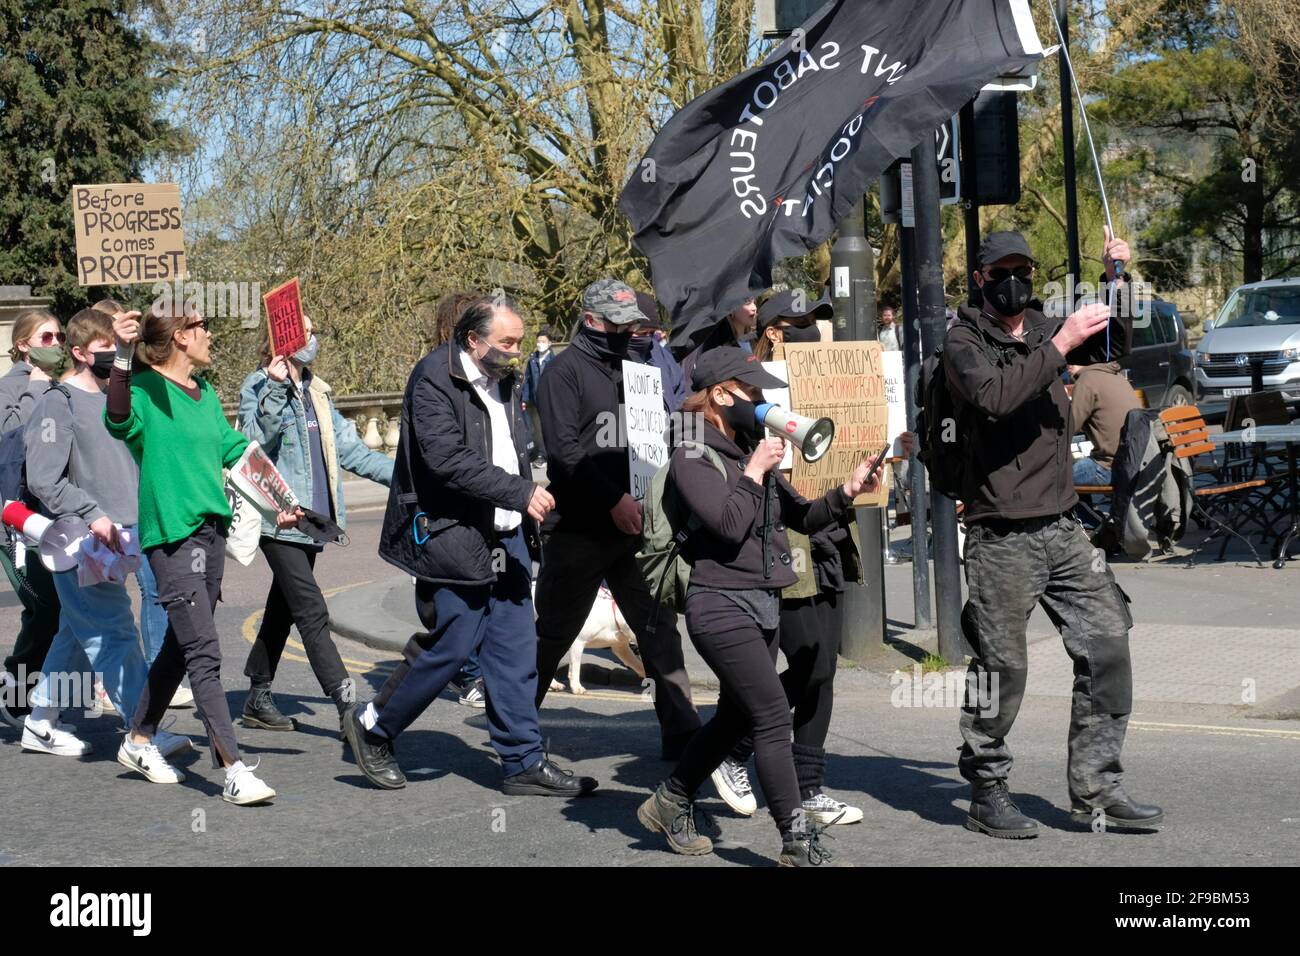 Abbey Courtyard, Bath, UK. 17th Apr, 2021. Protestors march through Bath to express discontent with the Governments changes to the right to protest. This is one of many protests around the UK today. Credit: JMF News/Alamy Live News Stock Photo